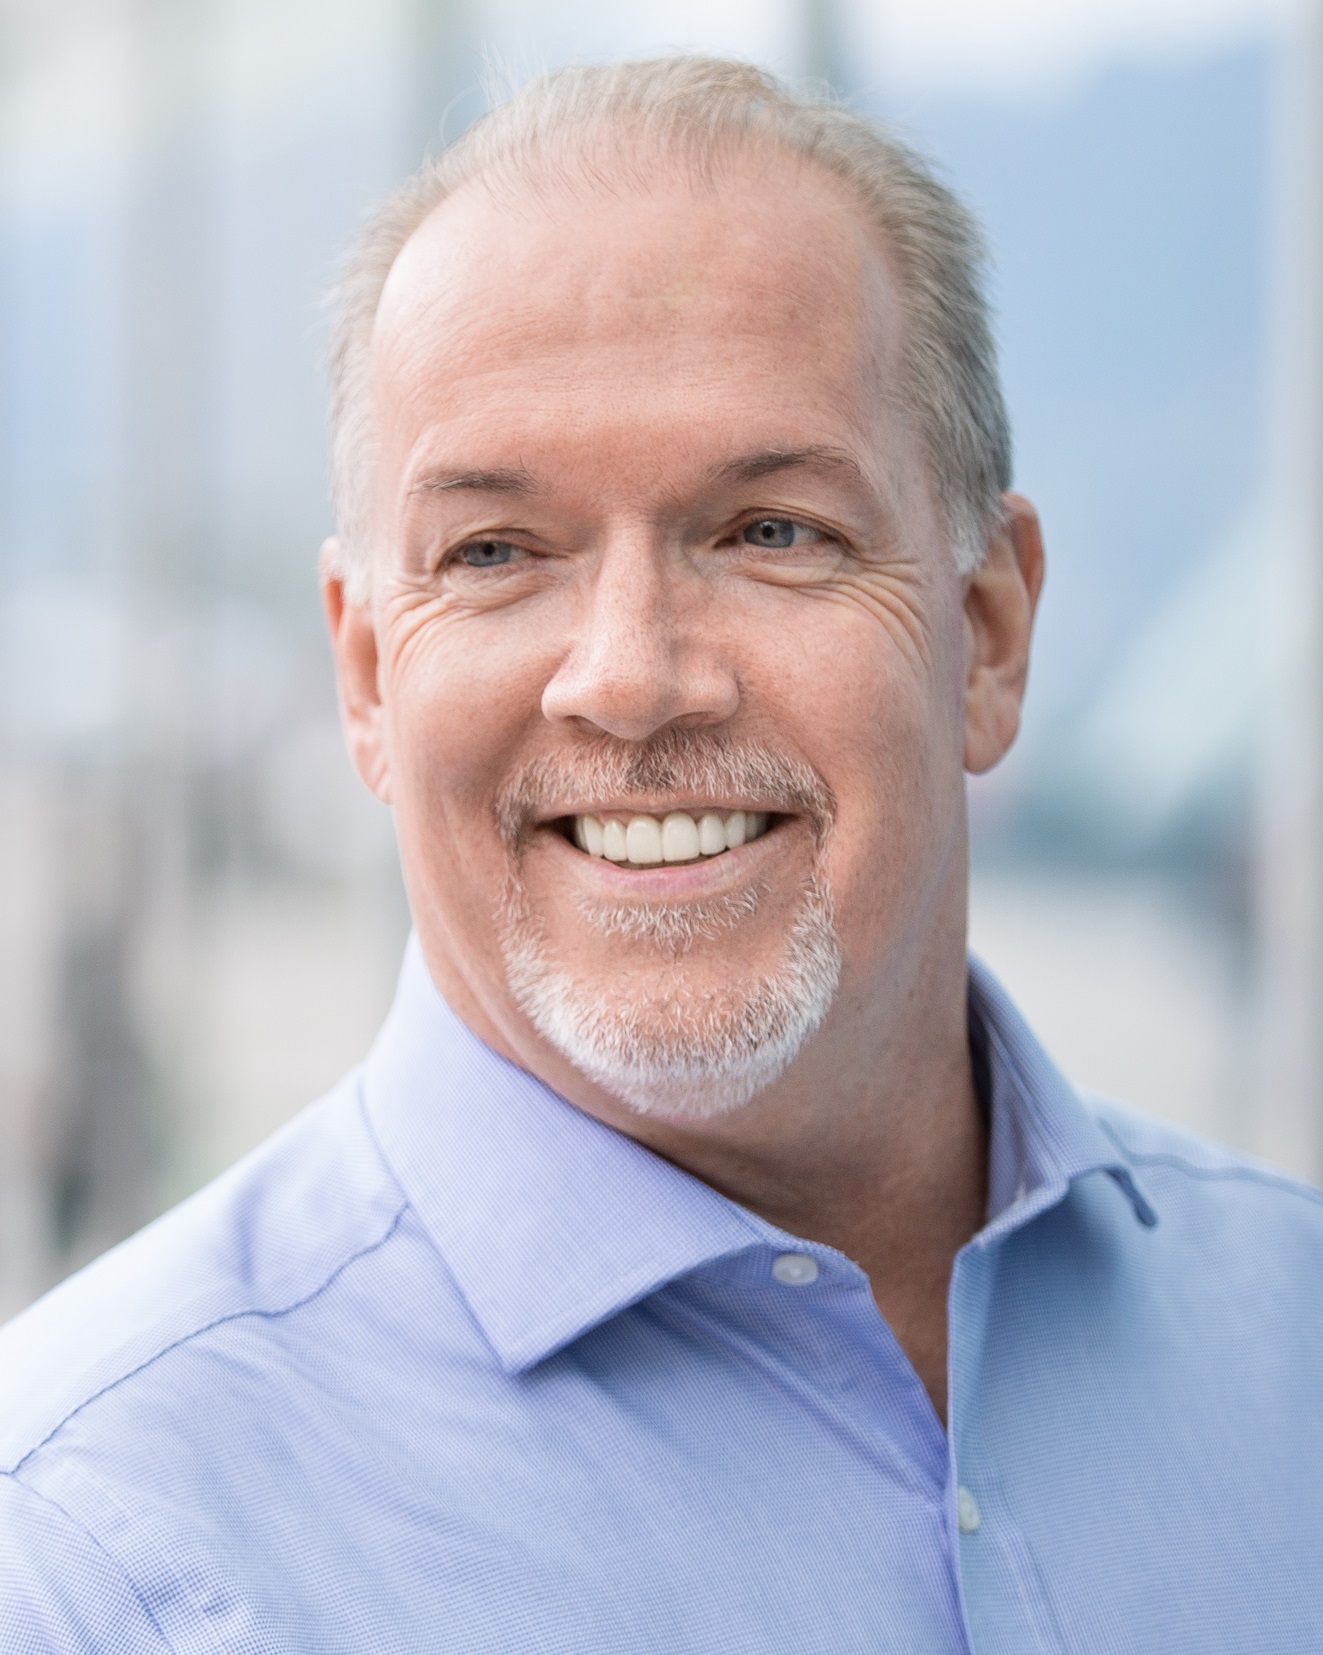 Premier Horgan to get surgery to remove lump Friday